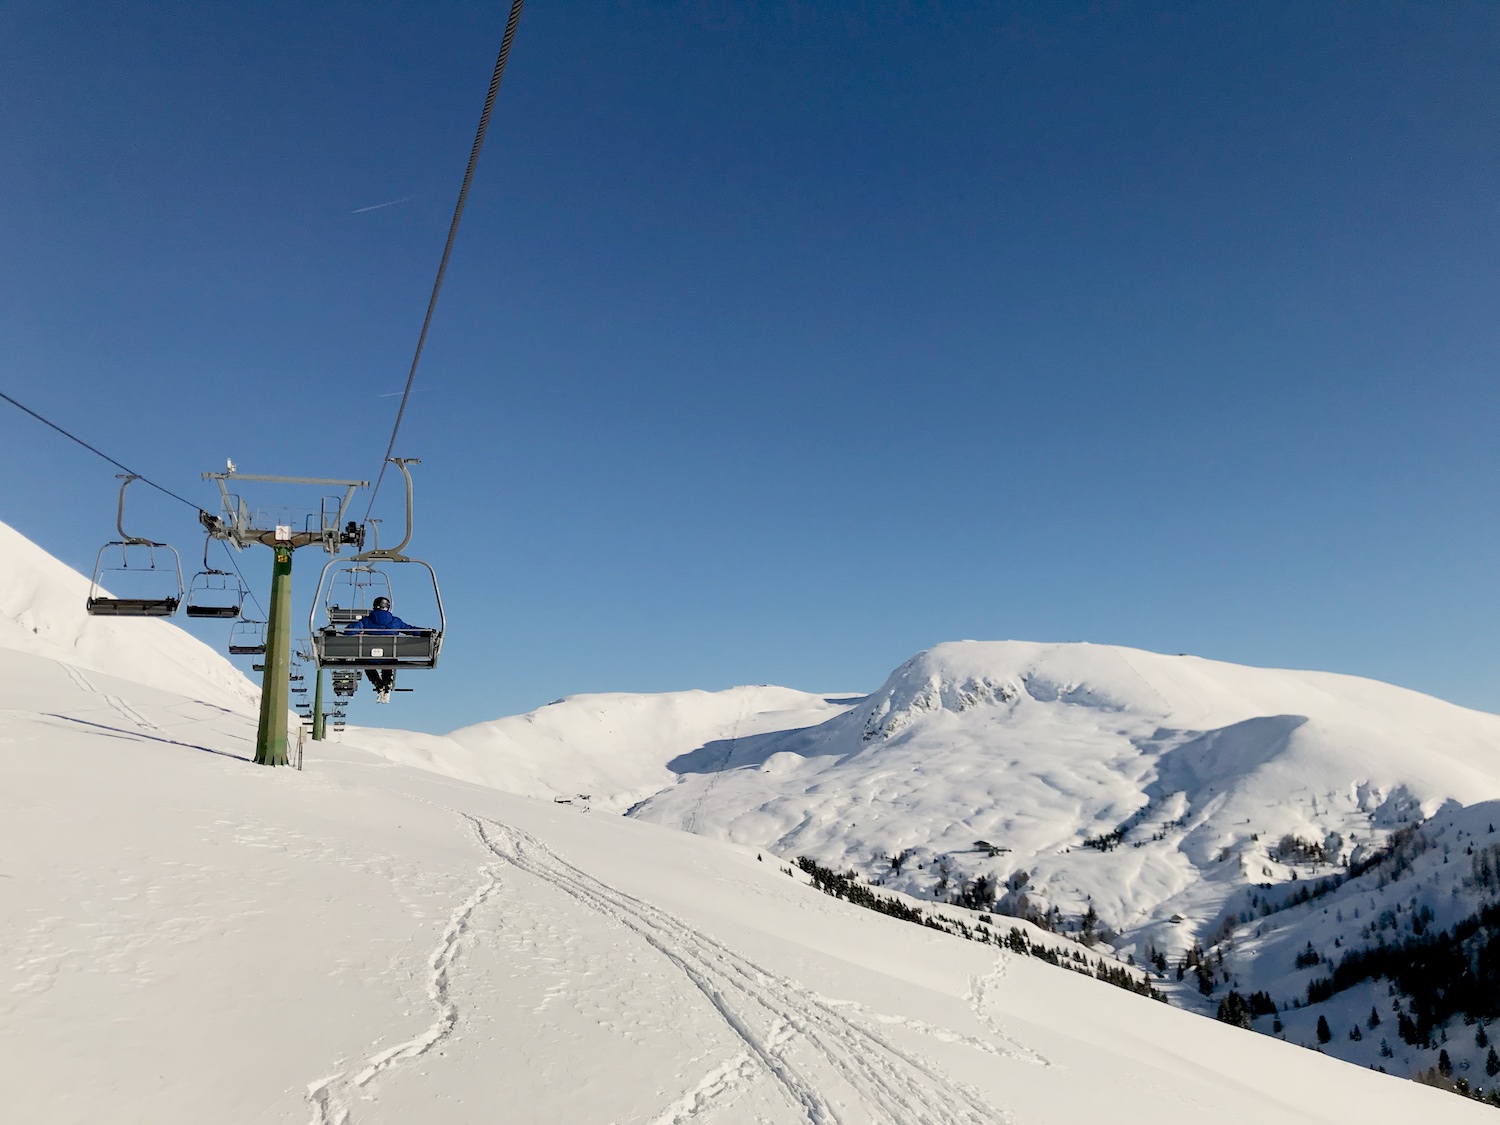 Ski Holiday Tales in South Tyrol